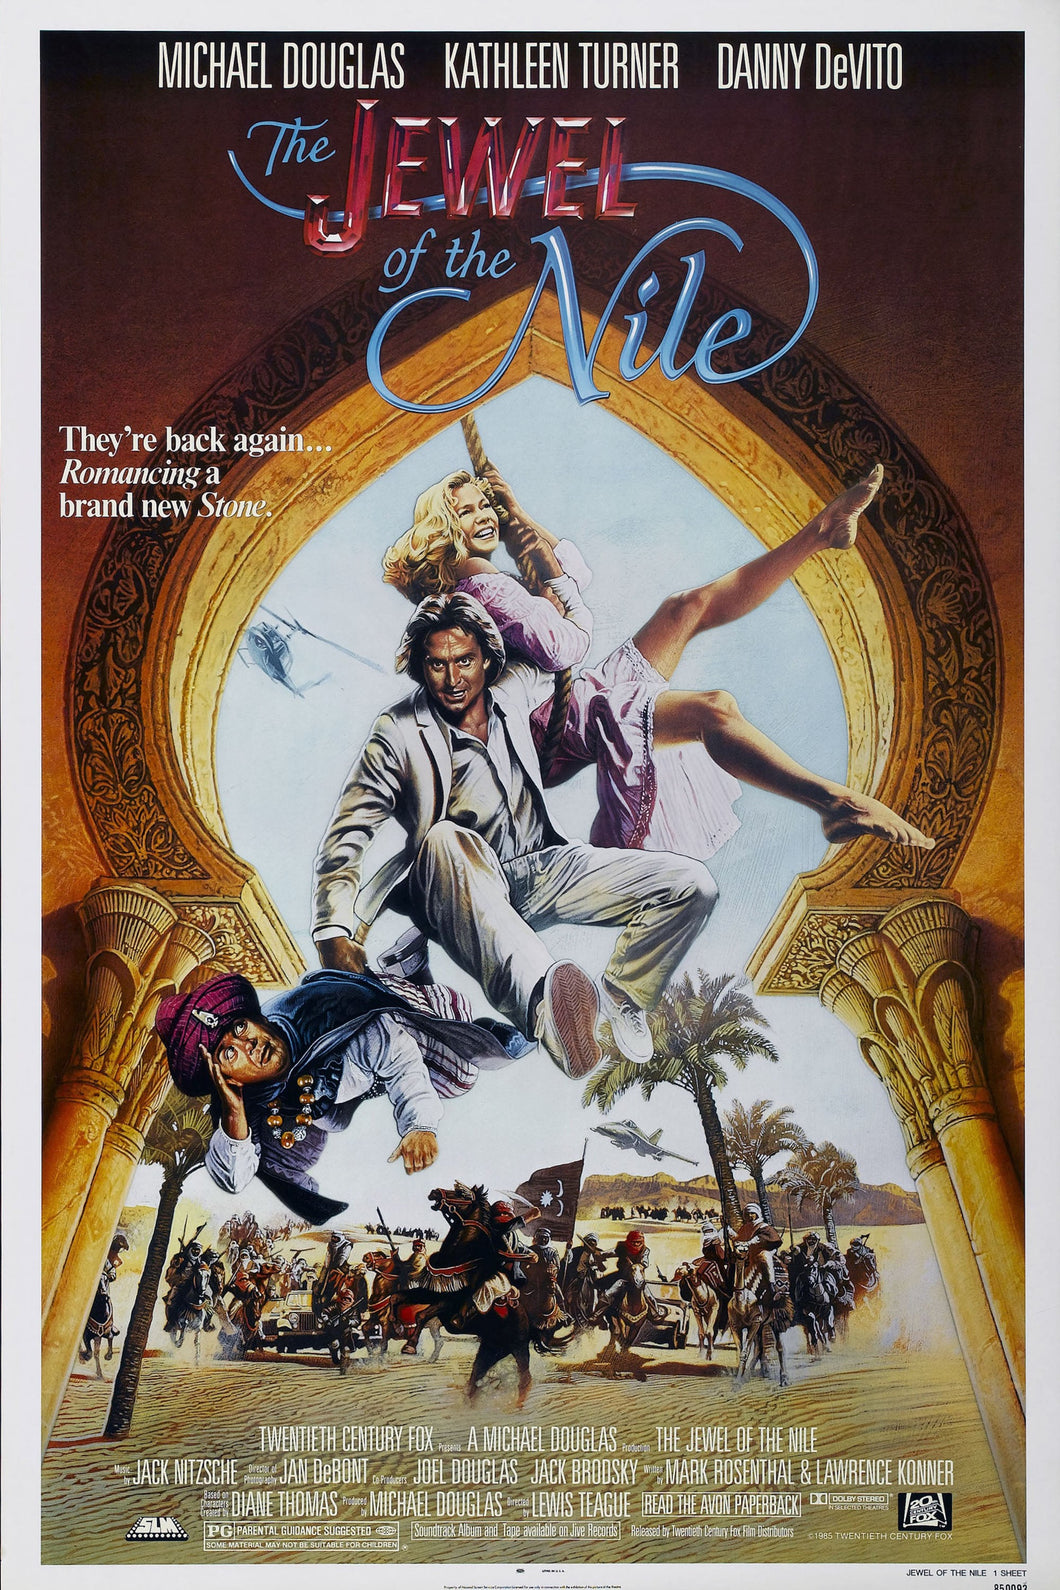 The Jewel of the Nile (1985) Movie Poster High Quality Glossy Paper A1 A2 A3 A4 A3 Framed or Unframed!!!